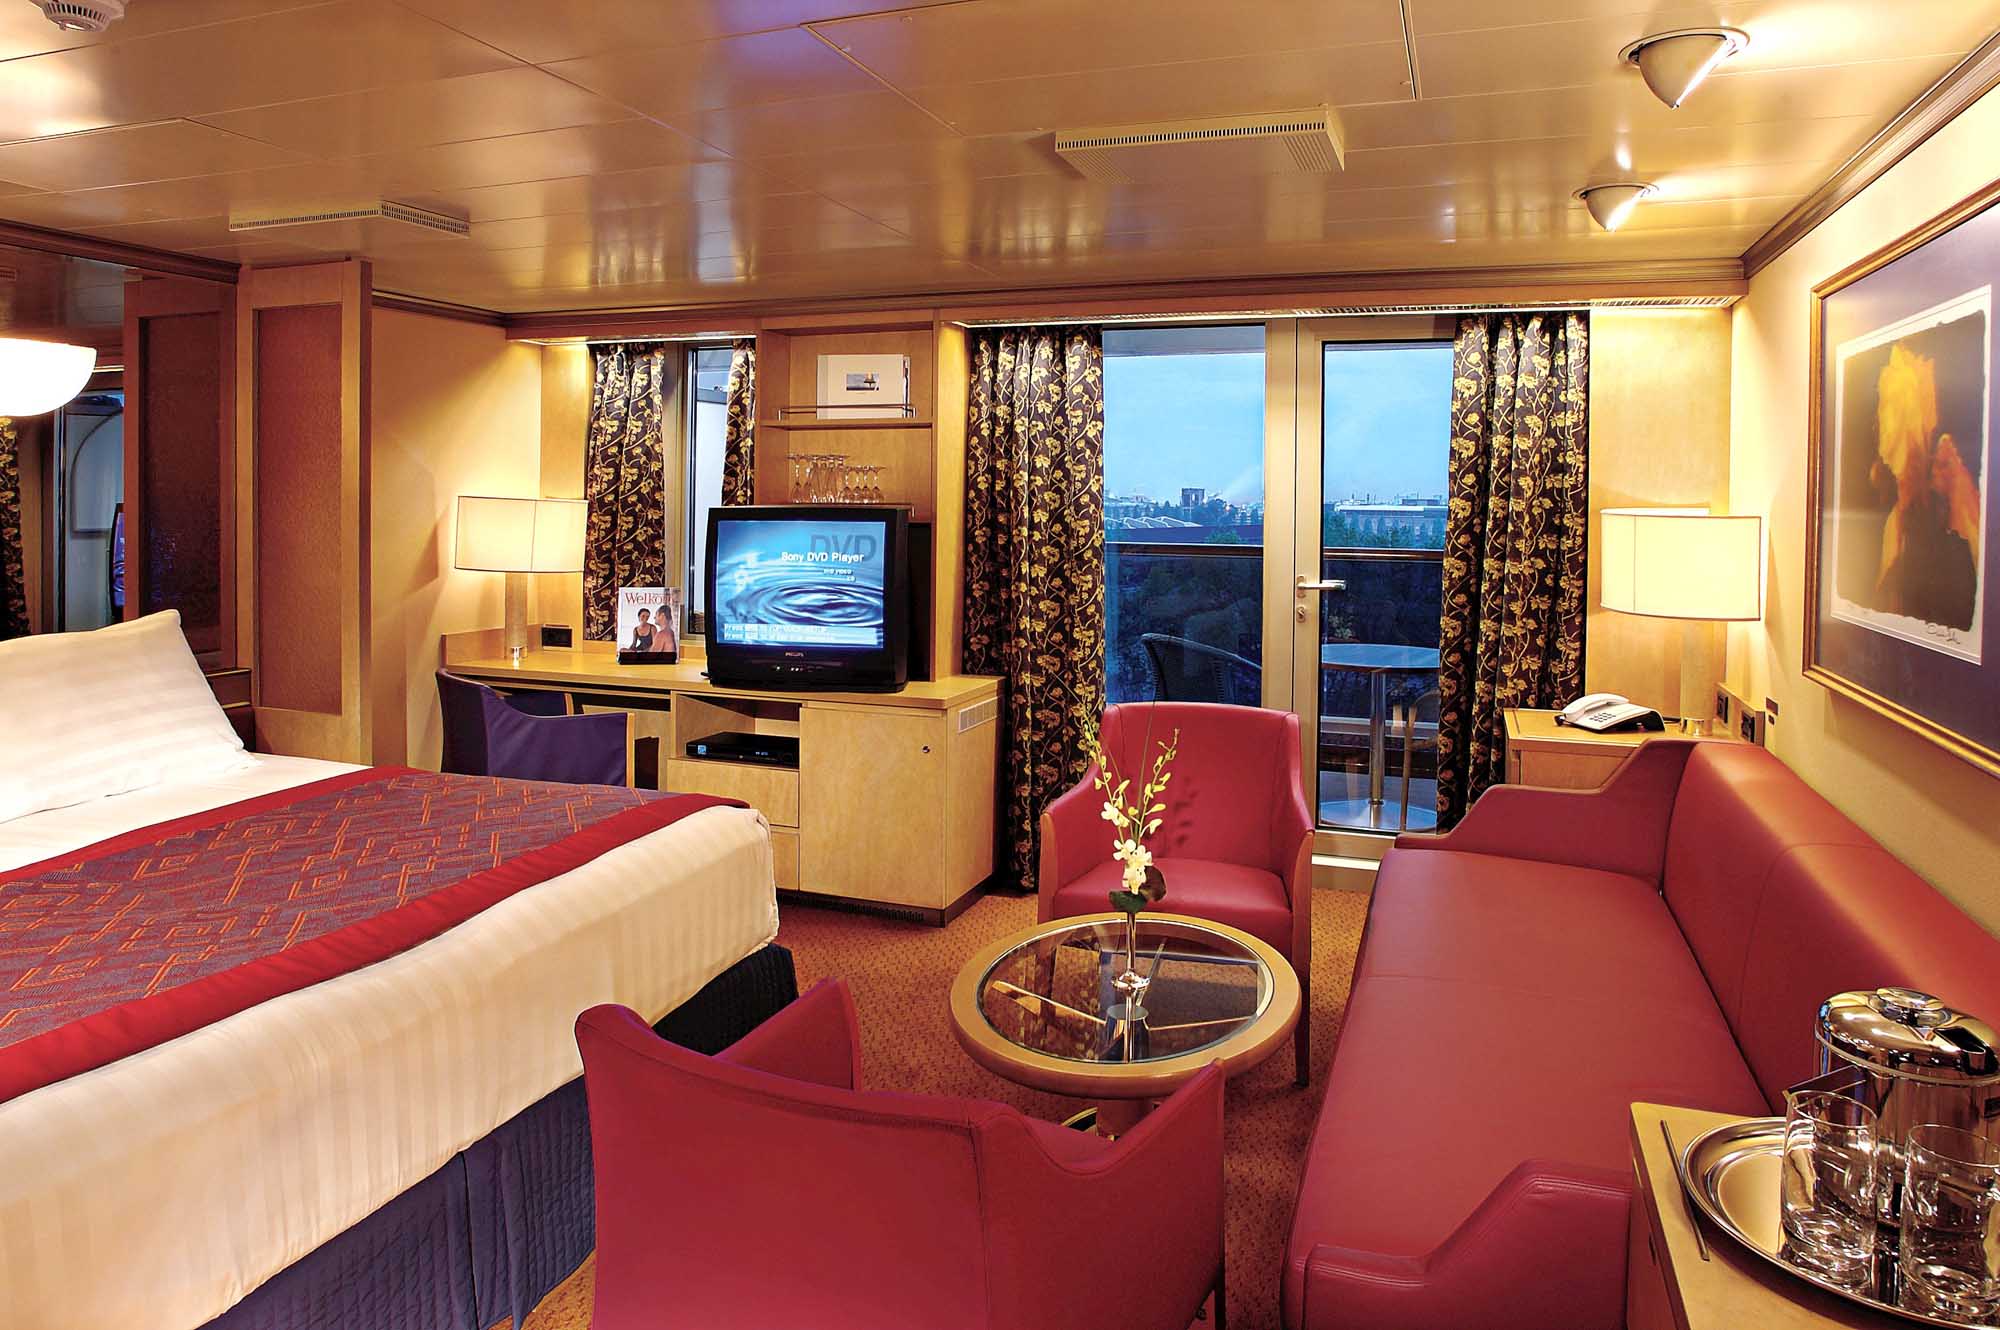 A Signature Suite aboard your Holland America Line ship runs 273 to 456 square feet, which includes a private verdanda, one queen or two lower beds, bathroom with dual sink vanity, full-size whirlpool bath, sitting area and floor-to-ceiling windows.